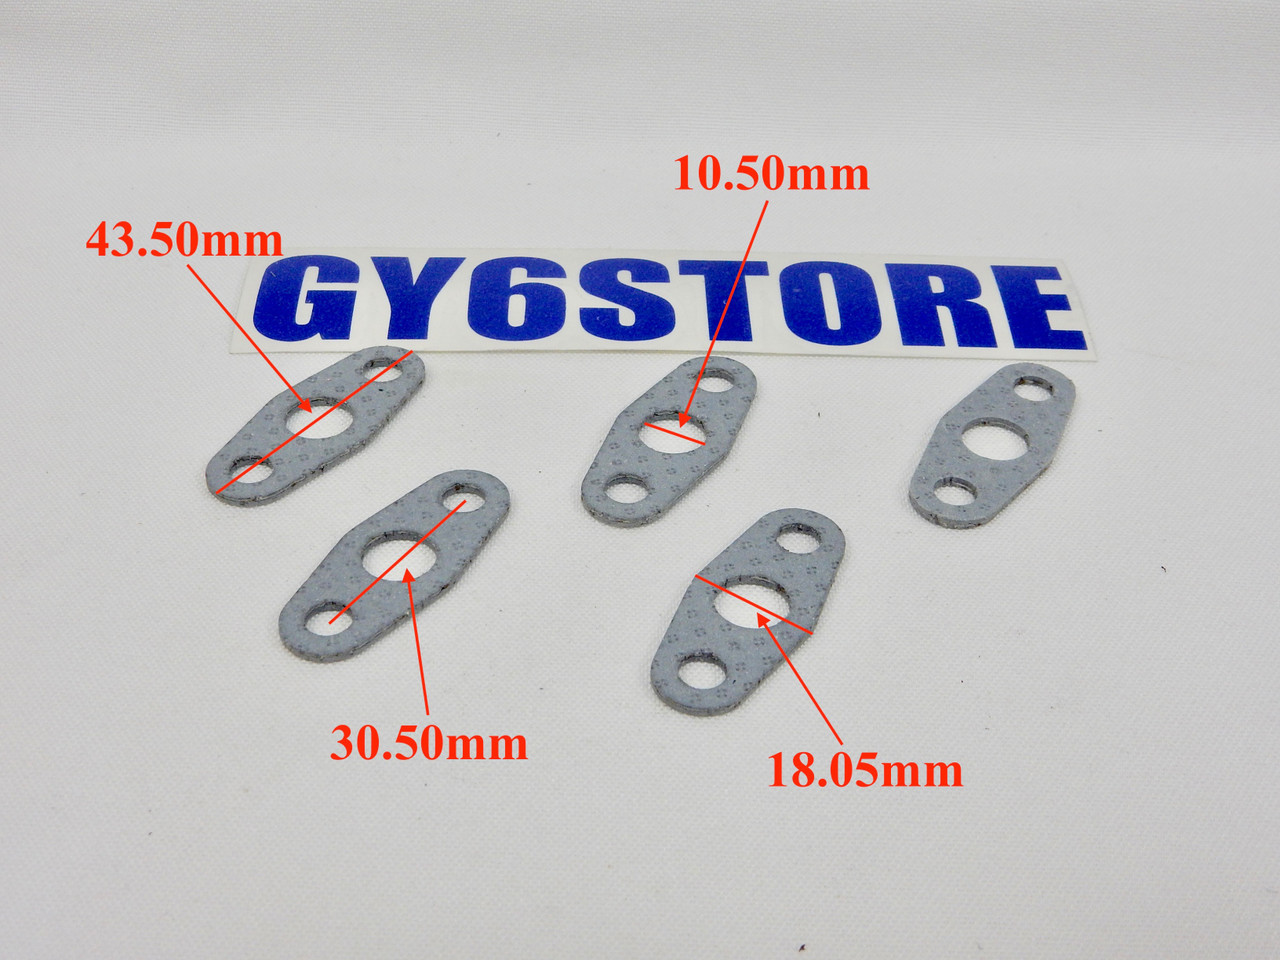 EGR BREATHER PIPE GASKET FOR 50cc - 100cc QMB139 SCOOTERS *BUYER GETS 5*